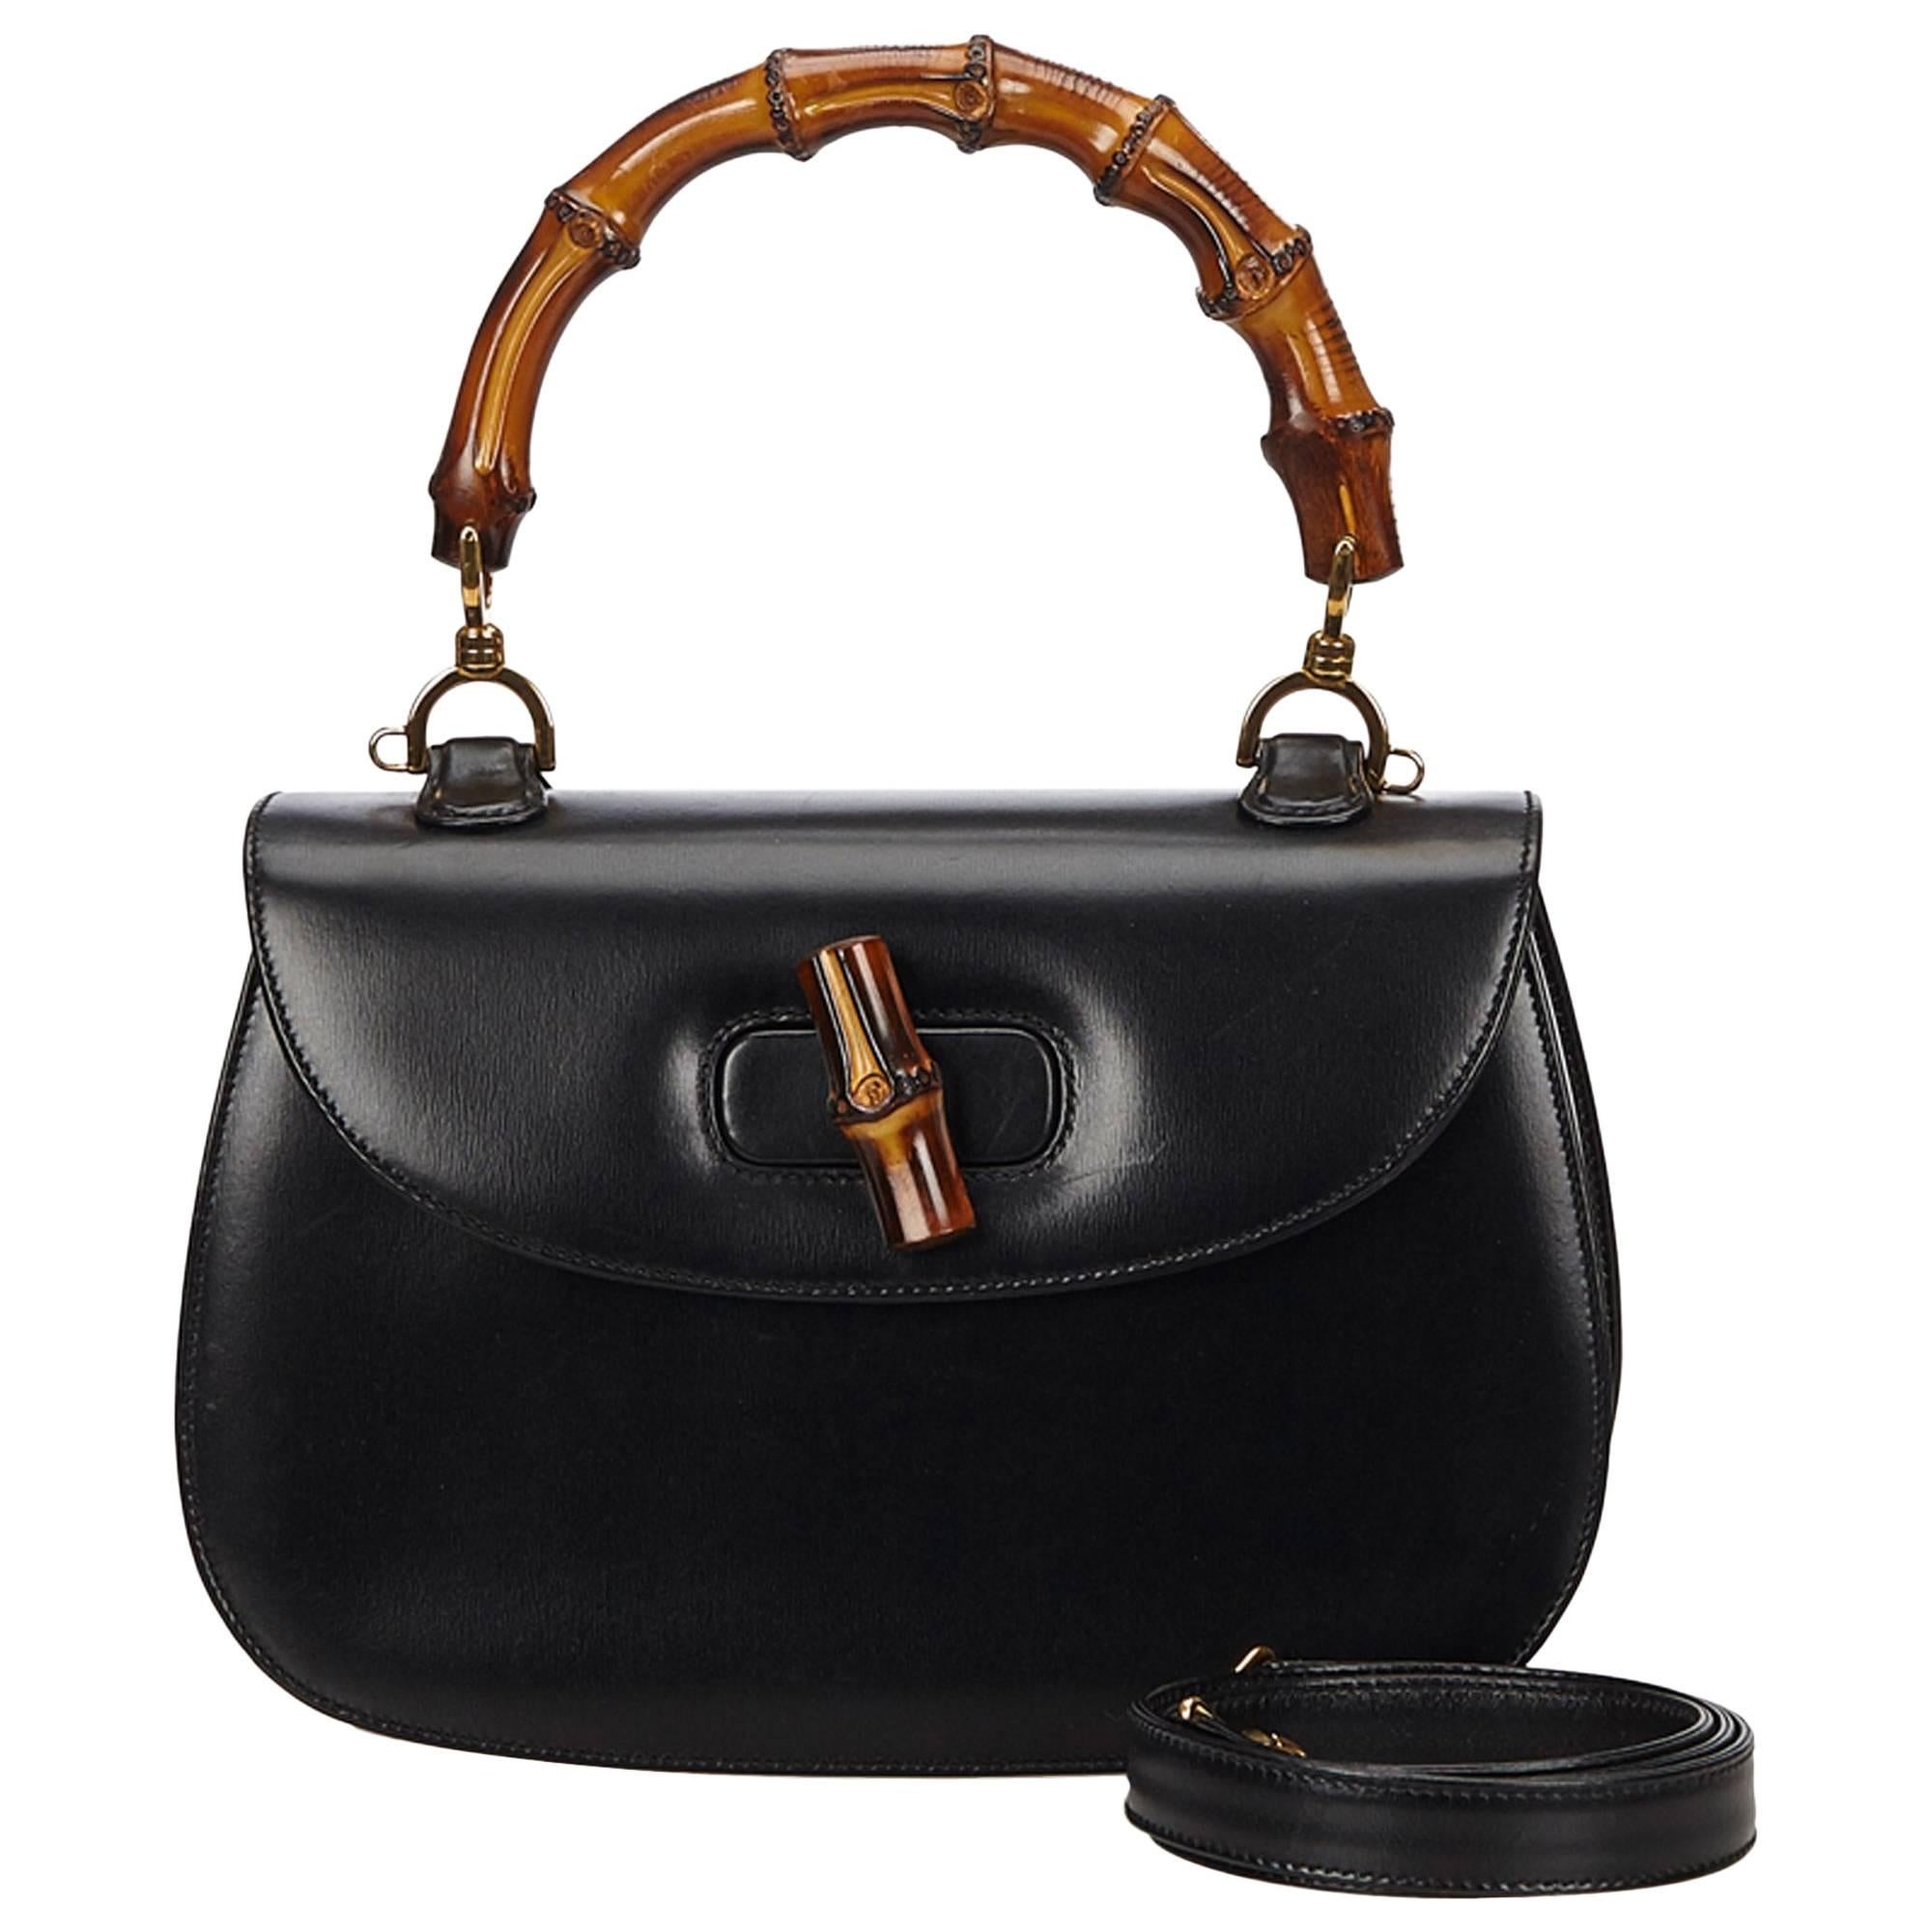 Gucci Black Leather Bamboo Handle Bag with detachable shoulder strap 